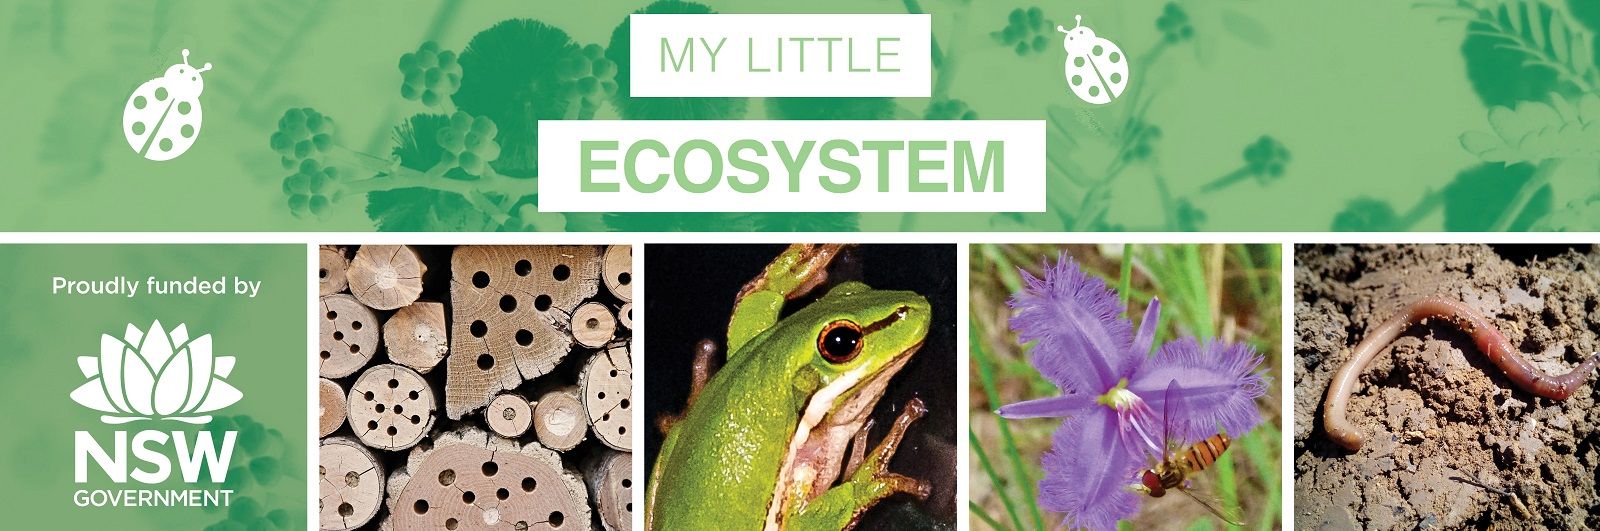 My Little Ecosystem sessions banner image